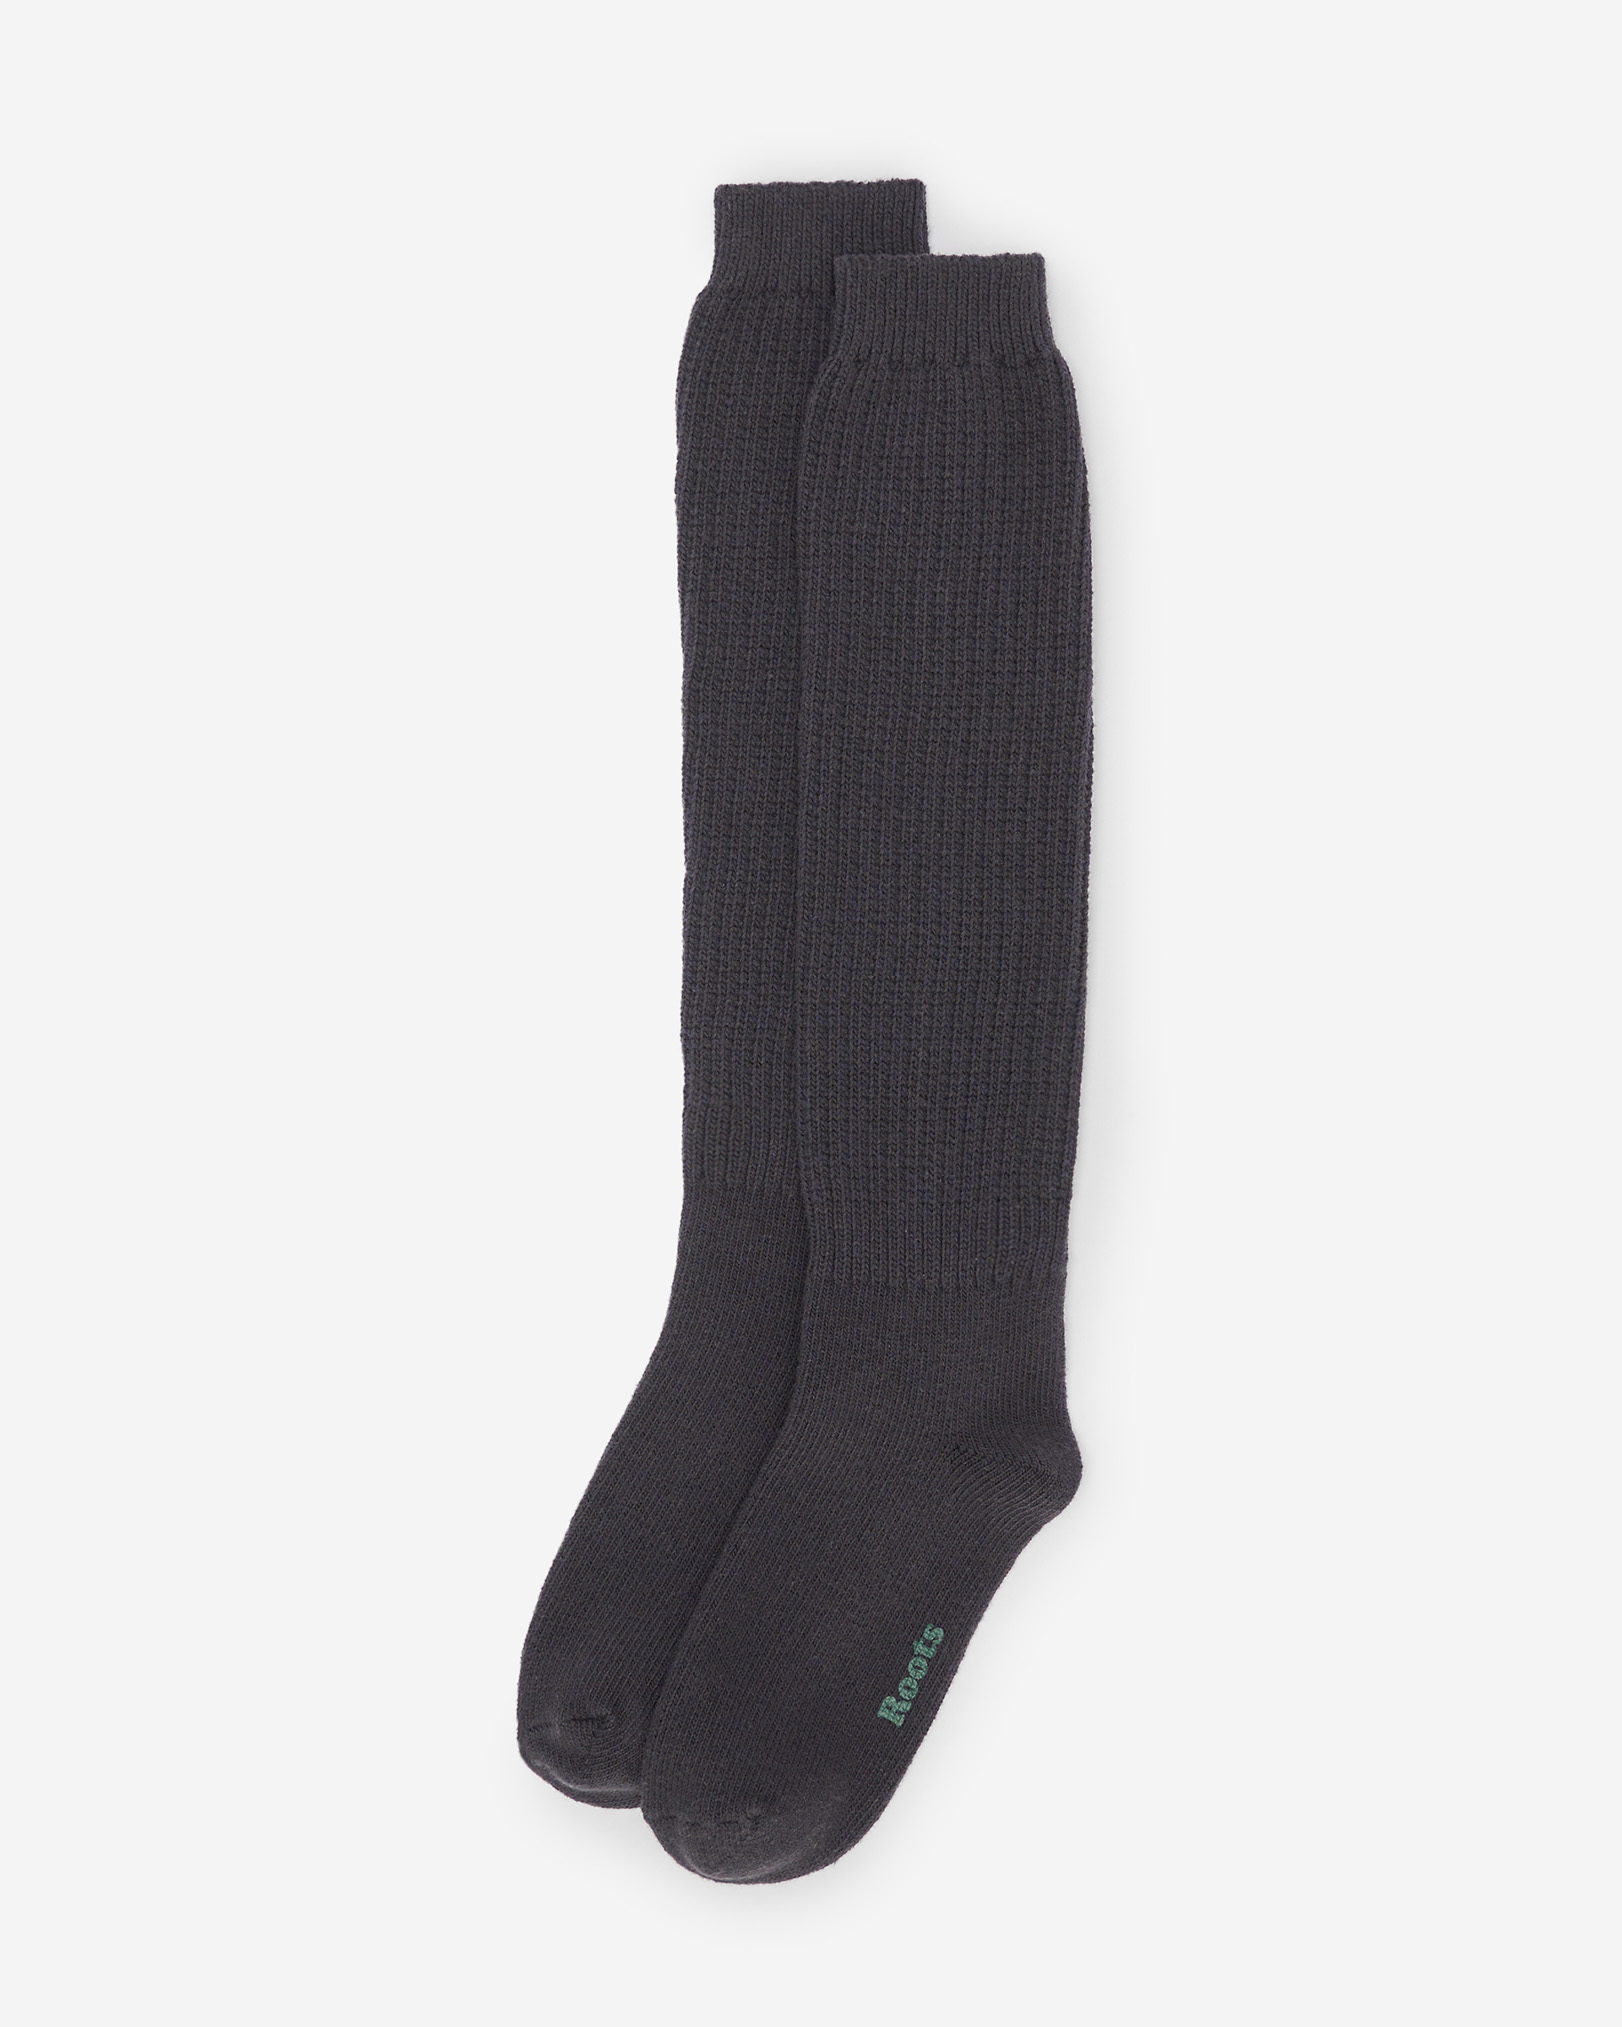 Roots Women's Warm-Up Slouch Sock in Charcoal Black